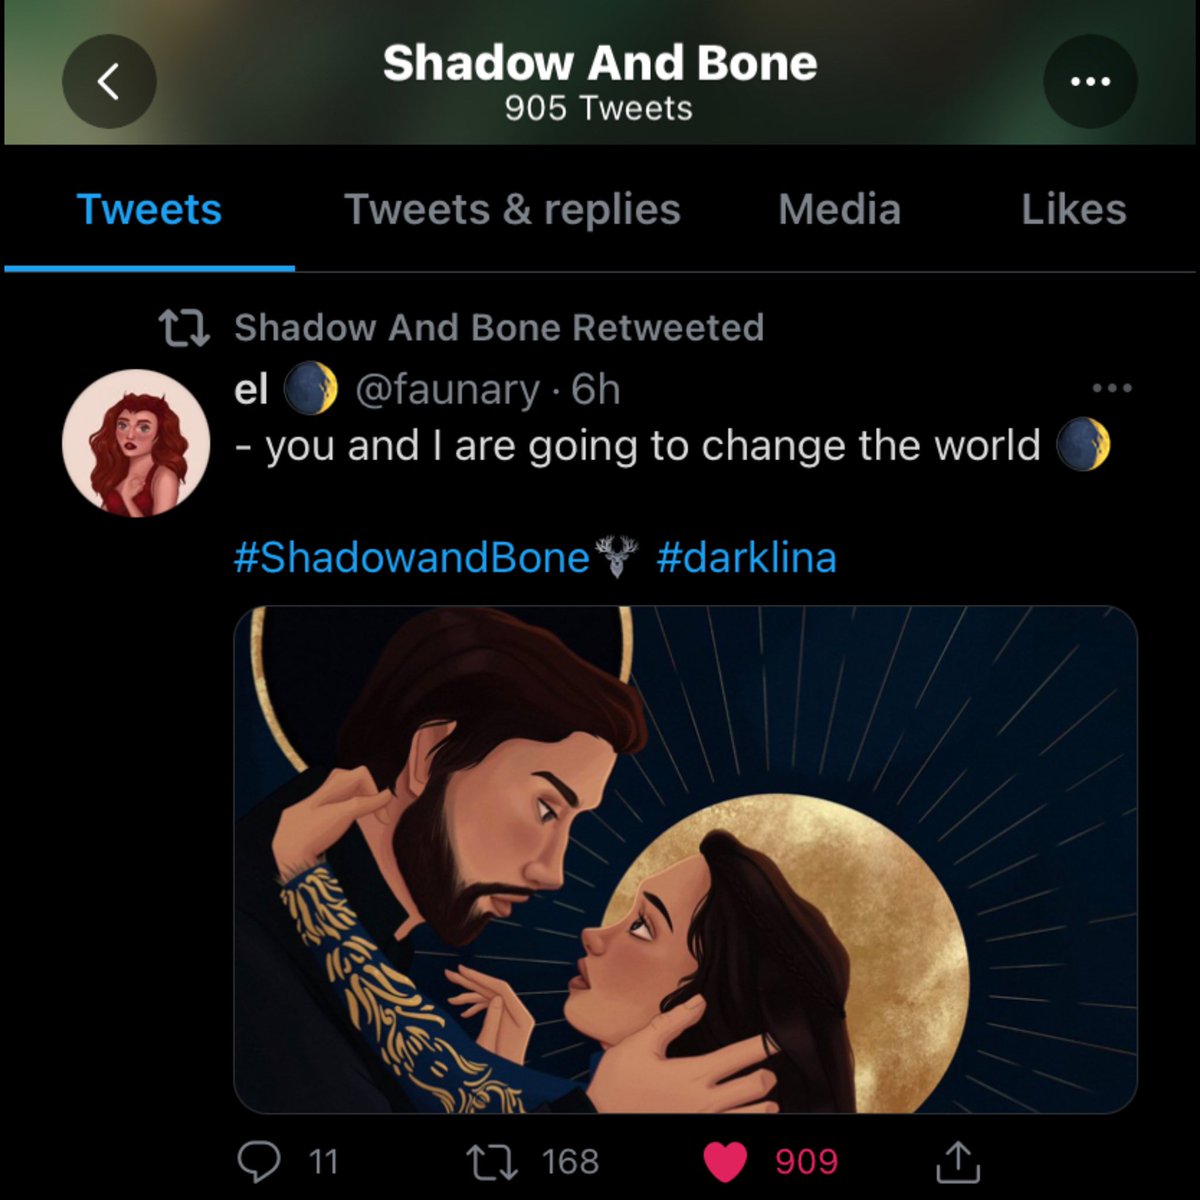 so which one of y’all darklinas hacked the shadow and bone account? 